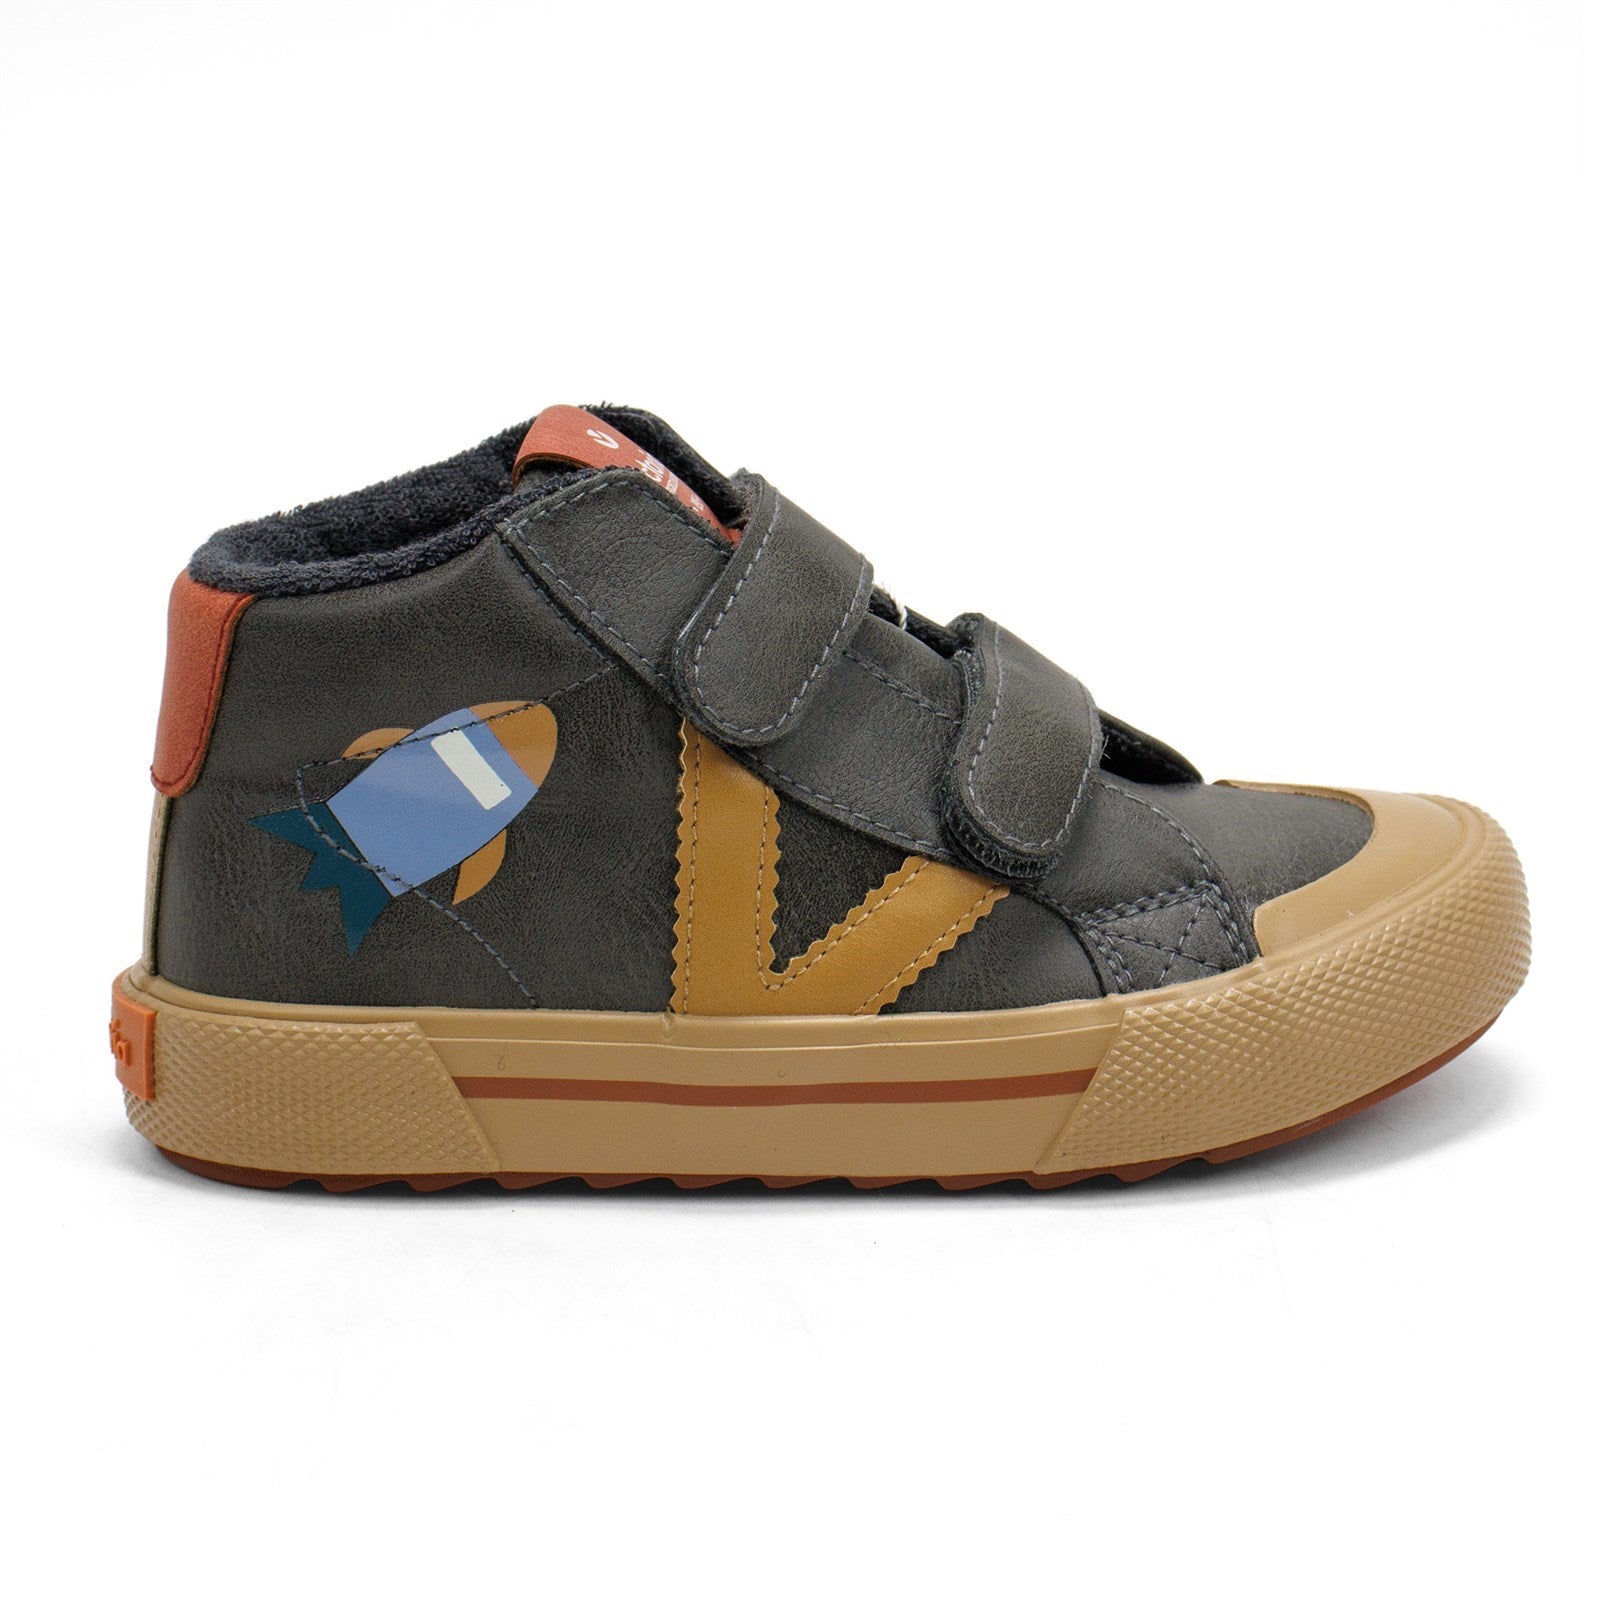 Victoria Boy Tribu Faux Leather Straps And Space Print Sneakers